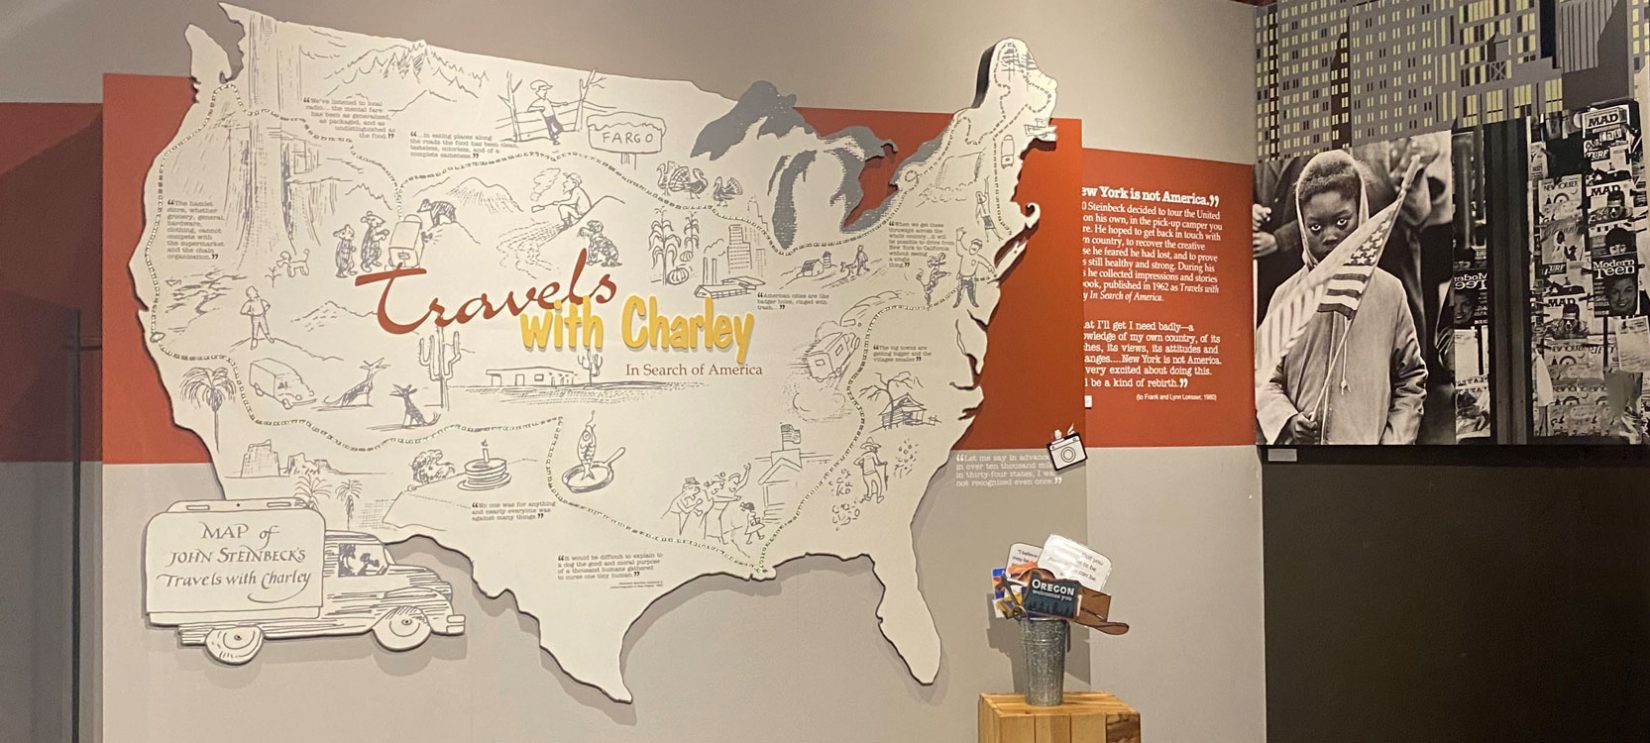 National Steinbeck Center Travels with Charley In Search of America